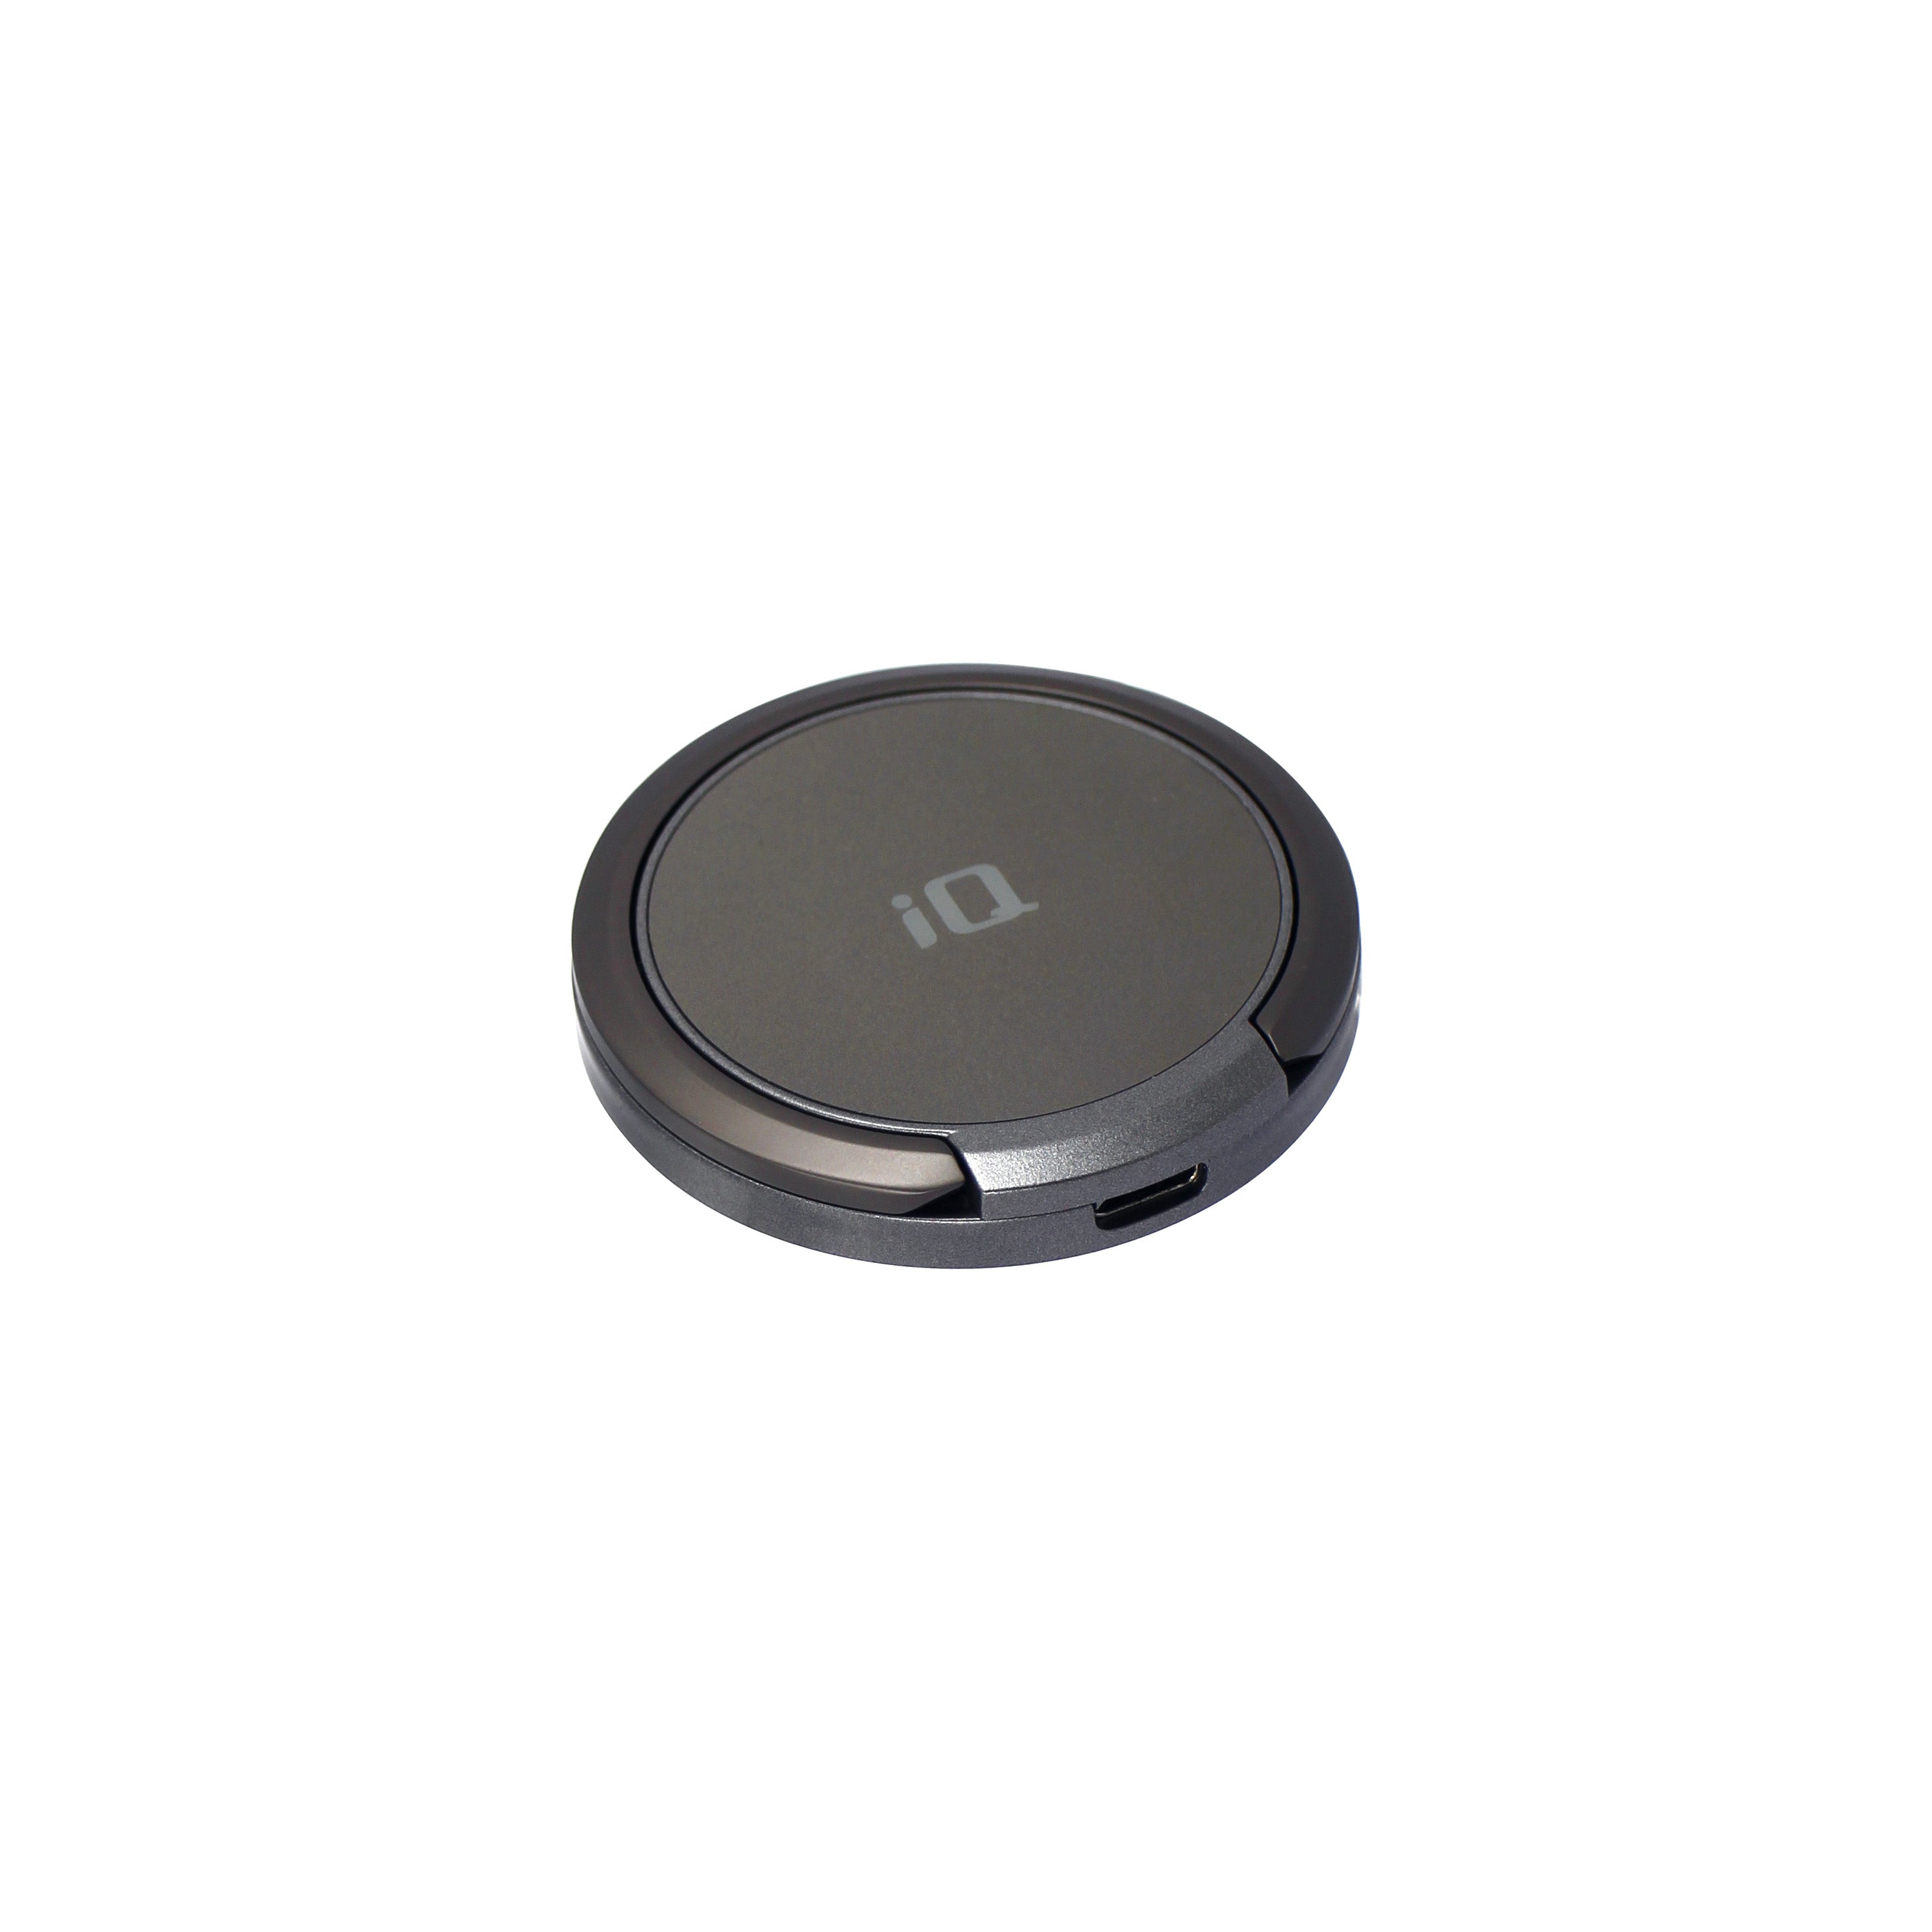 iQ Magsafe Compatible Wireless Charger with Kickstand